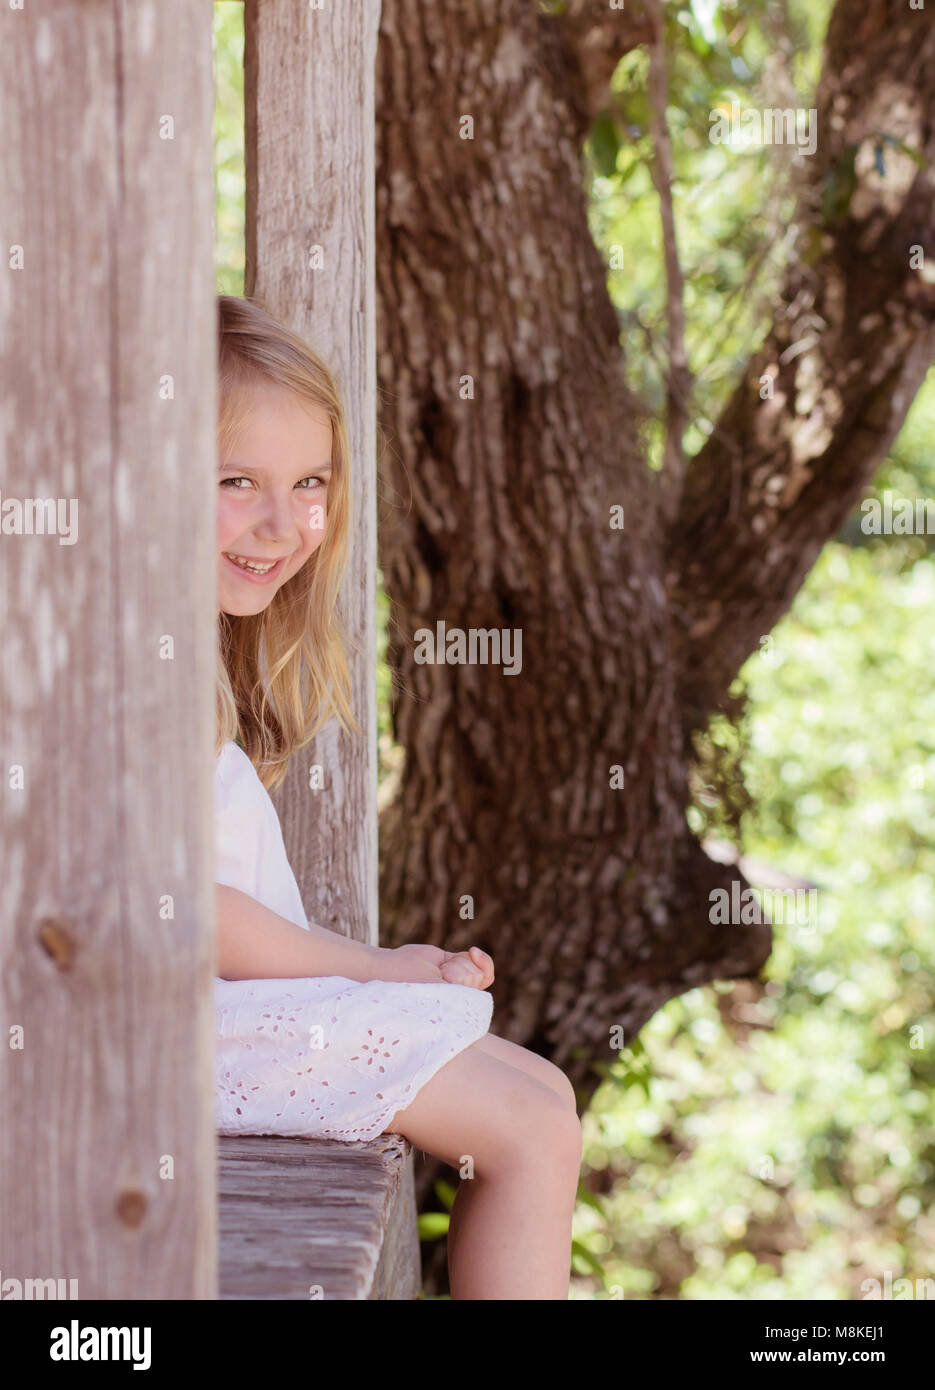 Little girl sitting on a porch barefoot Stock Photo